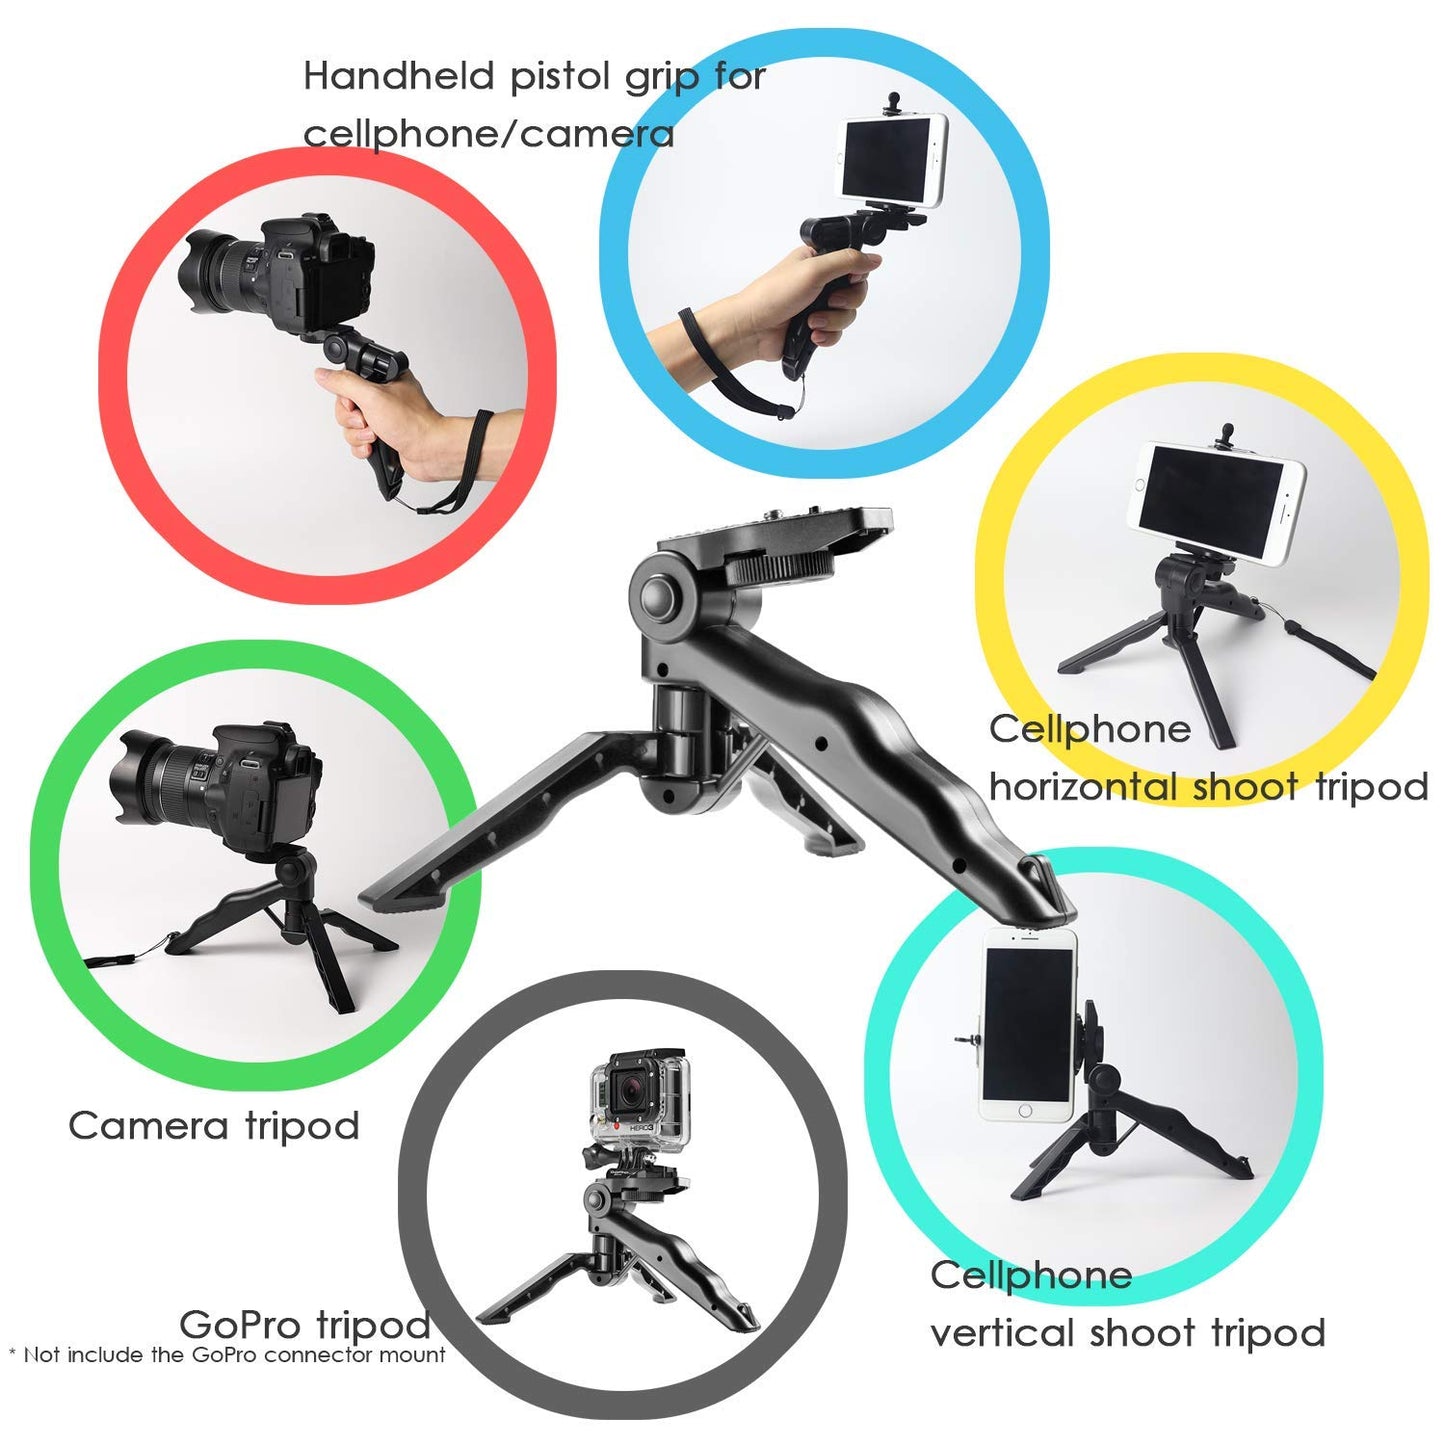 CEUTA® Mini Smartphone Tripod Grip Stabilizer, Desktop Tabletop Stand Tripod with Phone Holder and 2 in 1 Holder for iPhone Samsung Huawei and All Phones